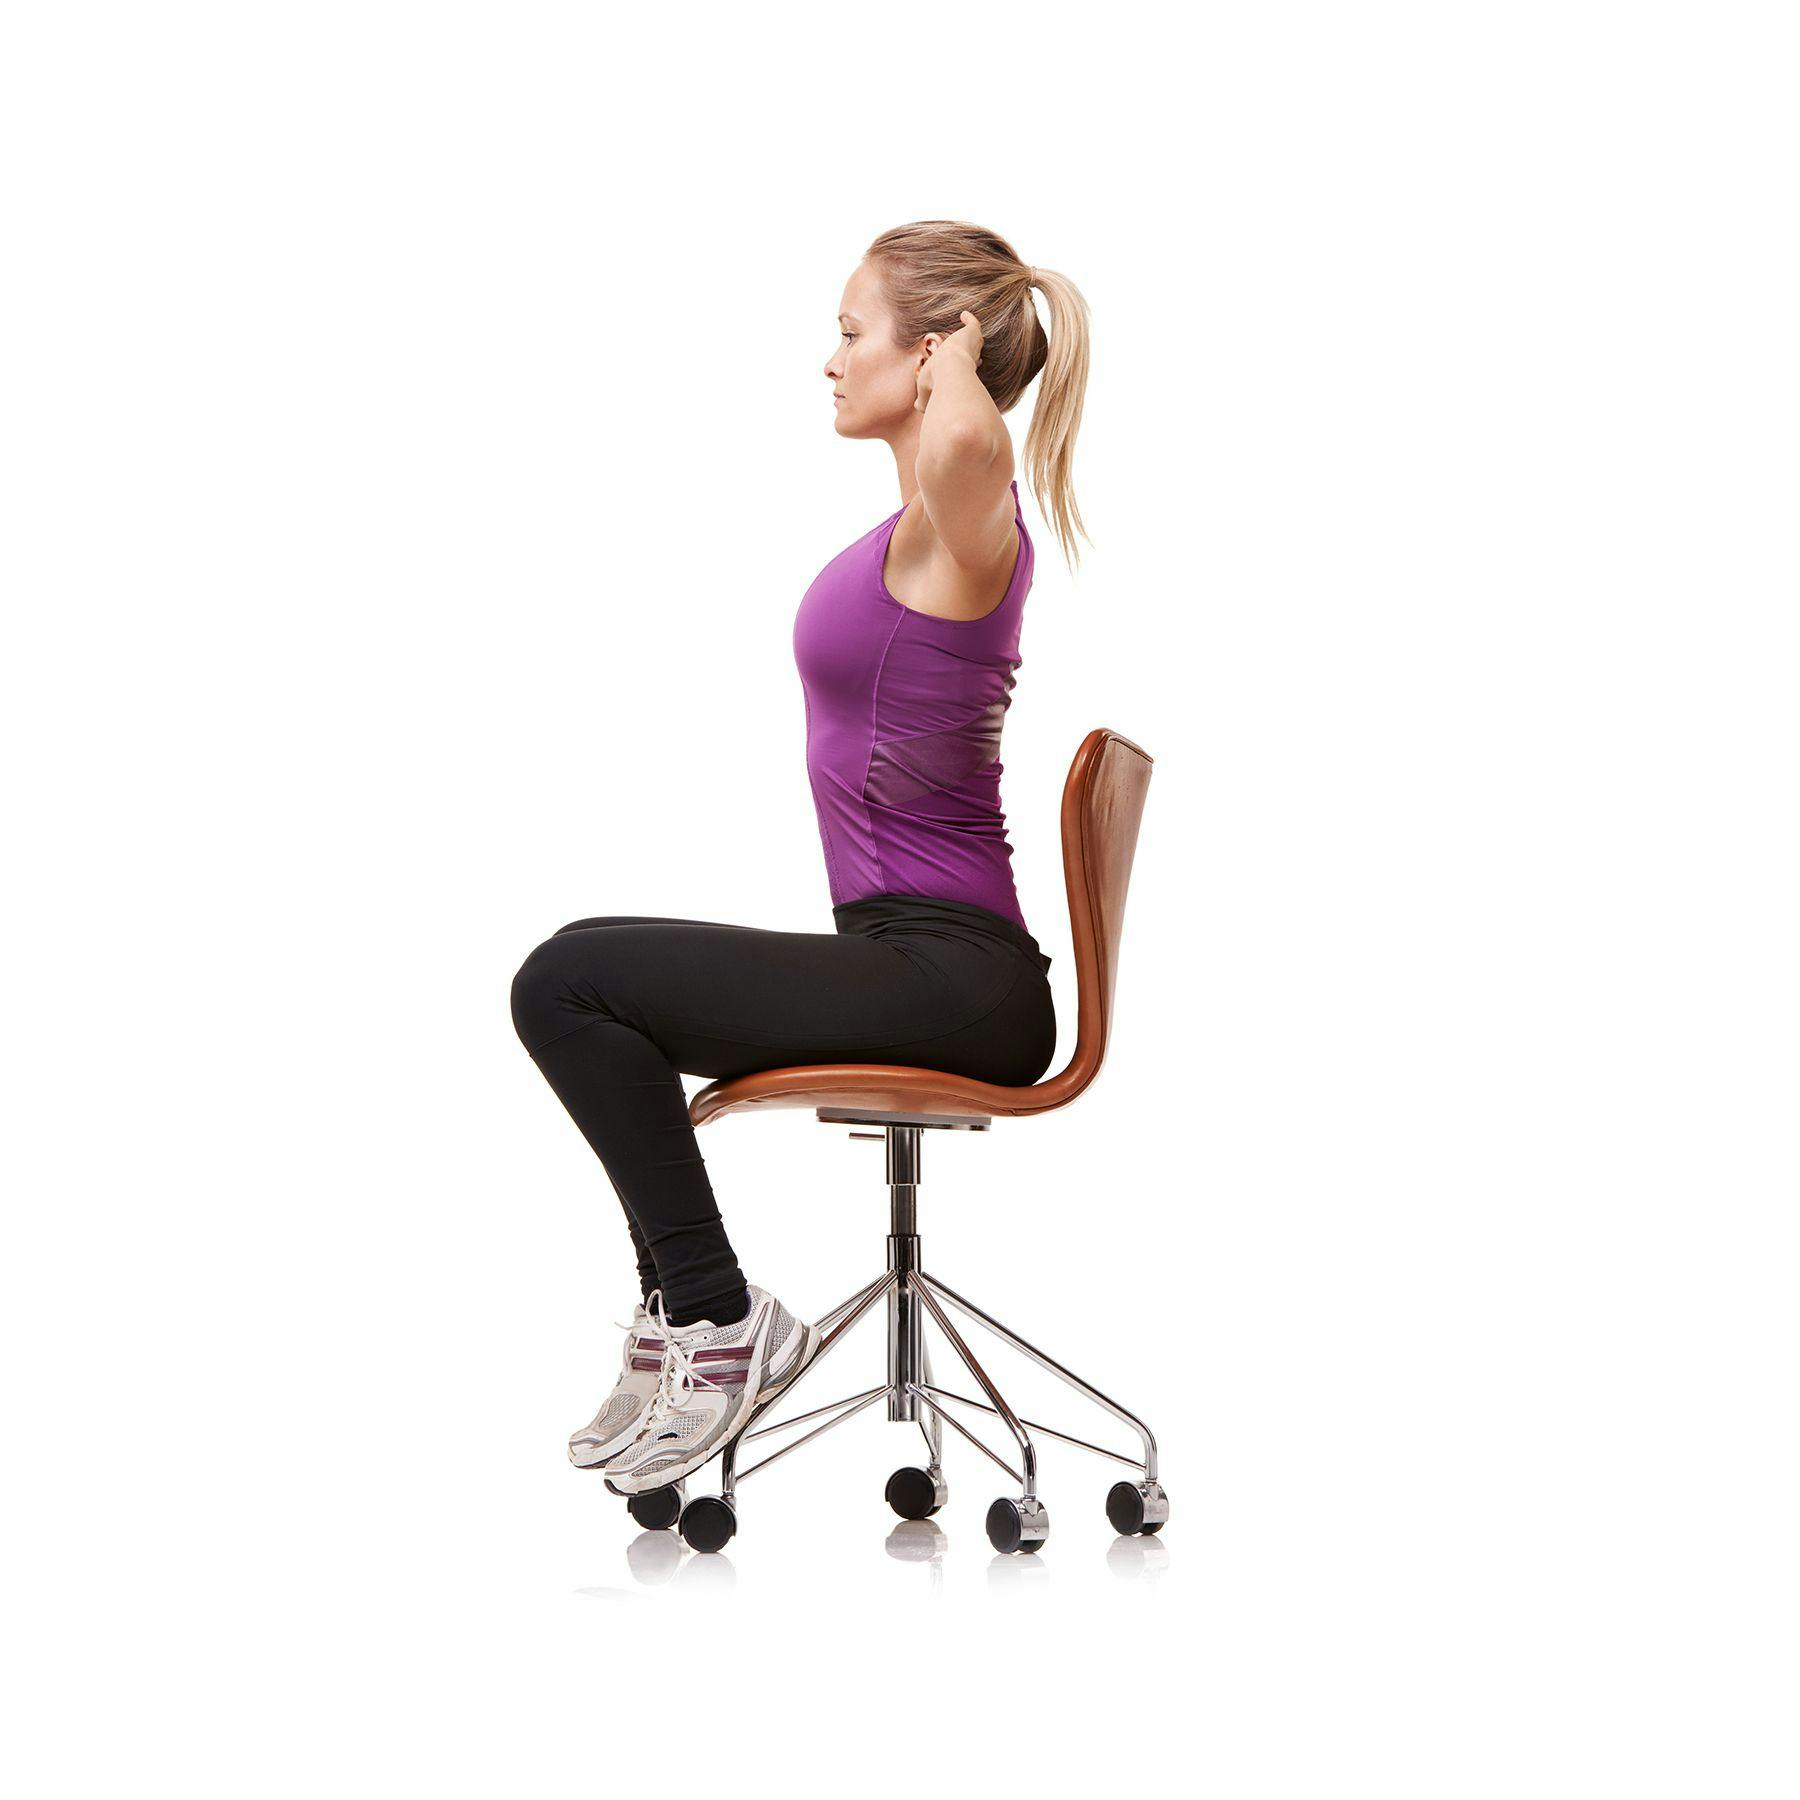 5 Essential Chairside Stretches for a Healthy Spine | Image Credit: ©   YuriAforPeopleImages/peopleimages.com - stock.adobe.com